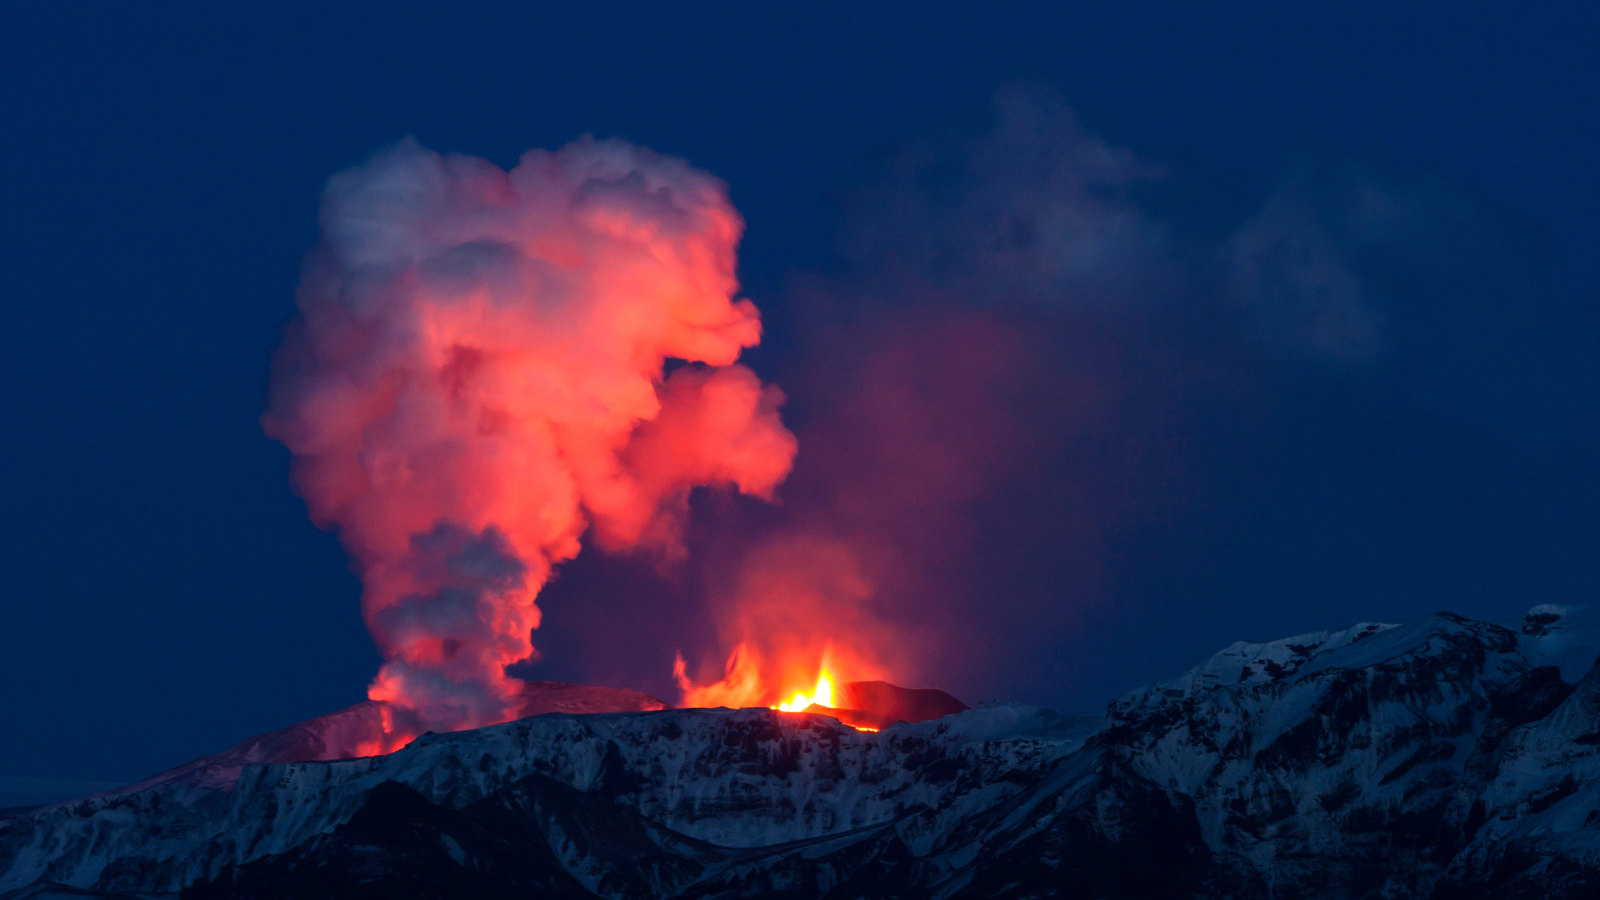 Smoke and fires from an eruption in South Iceland from a distance.